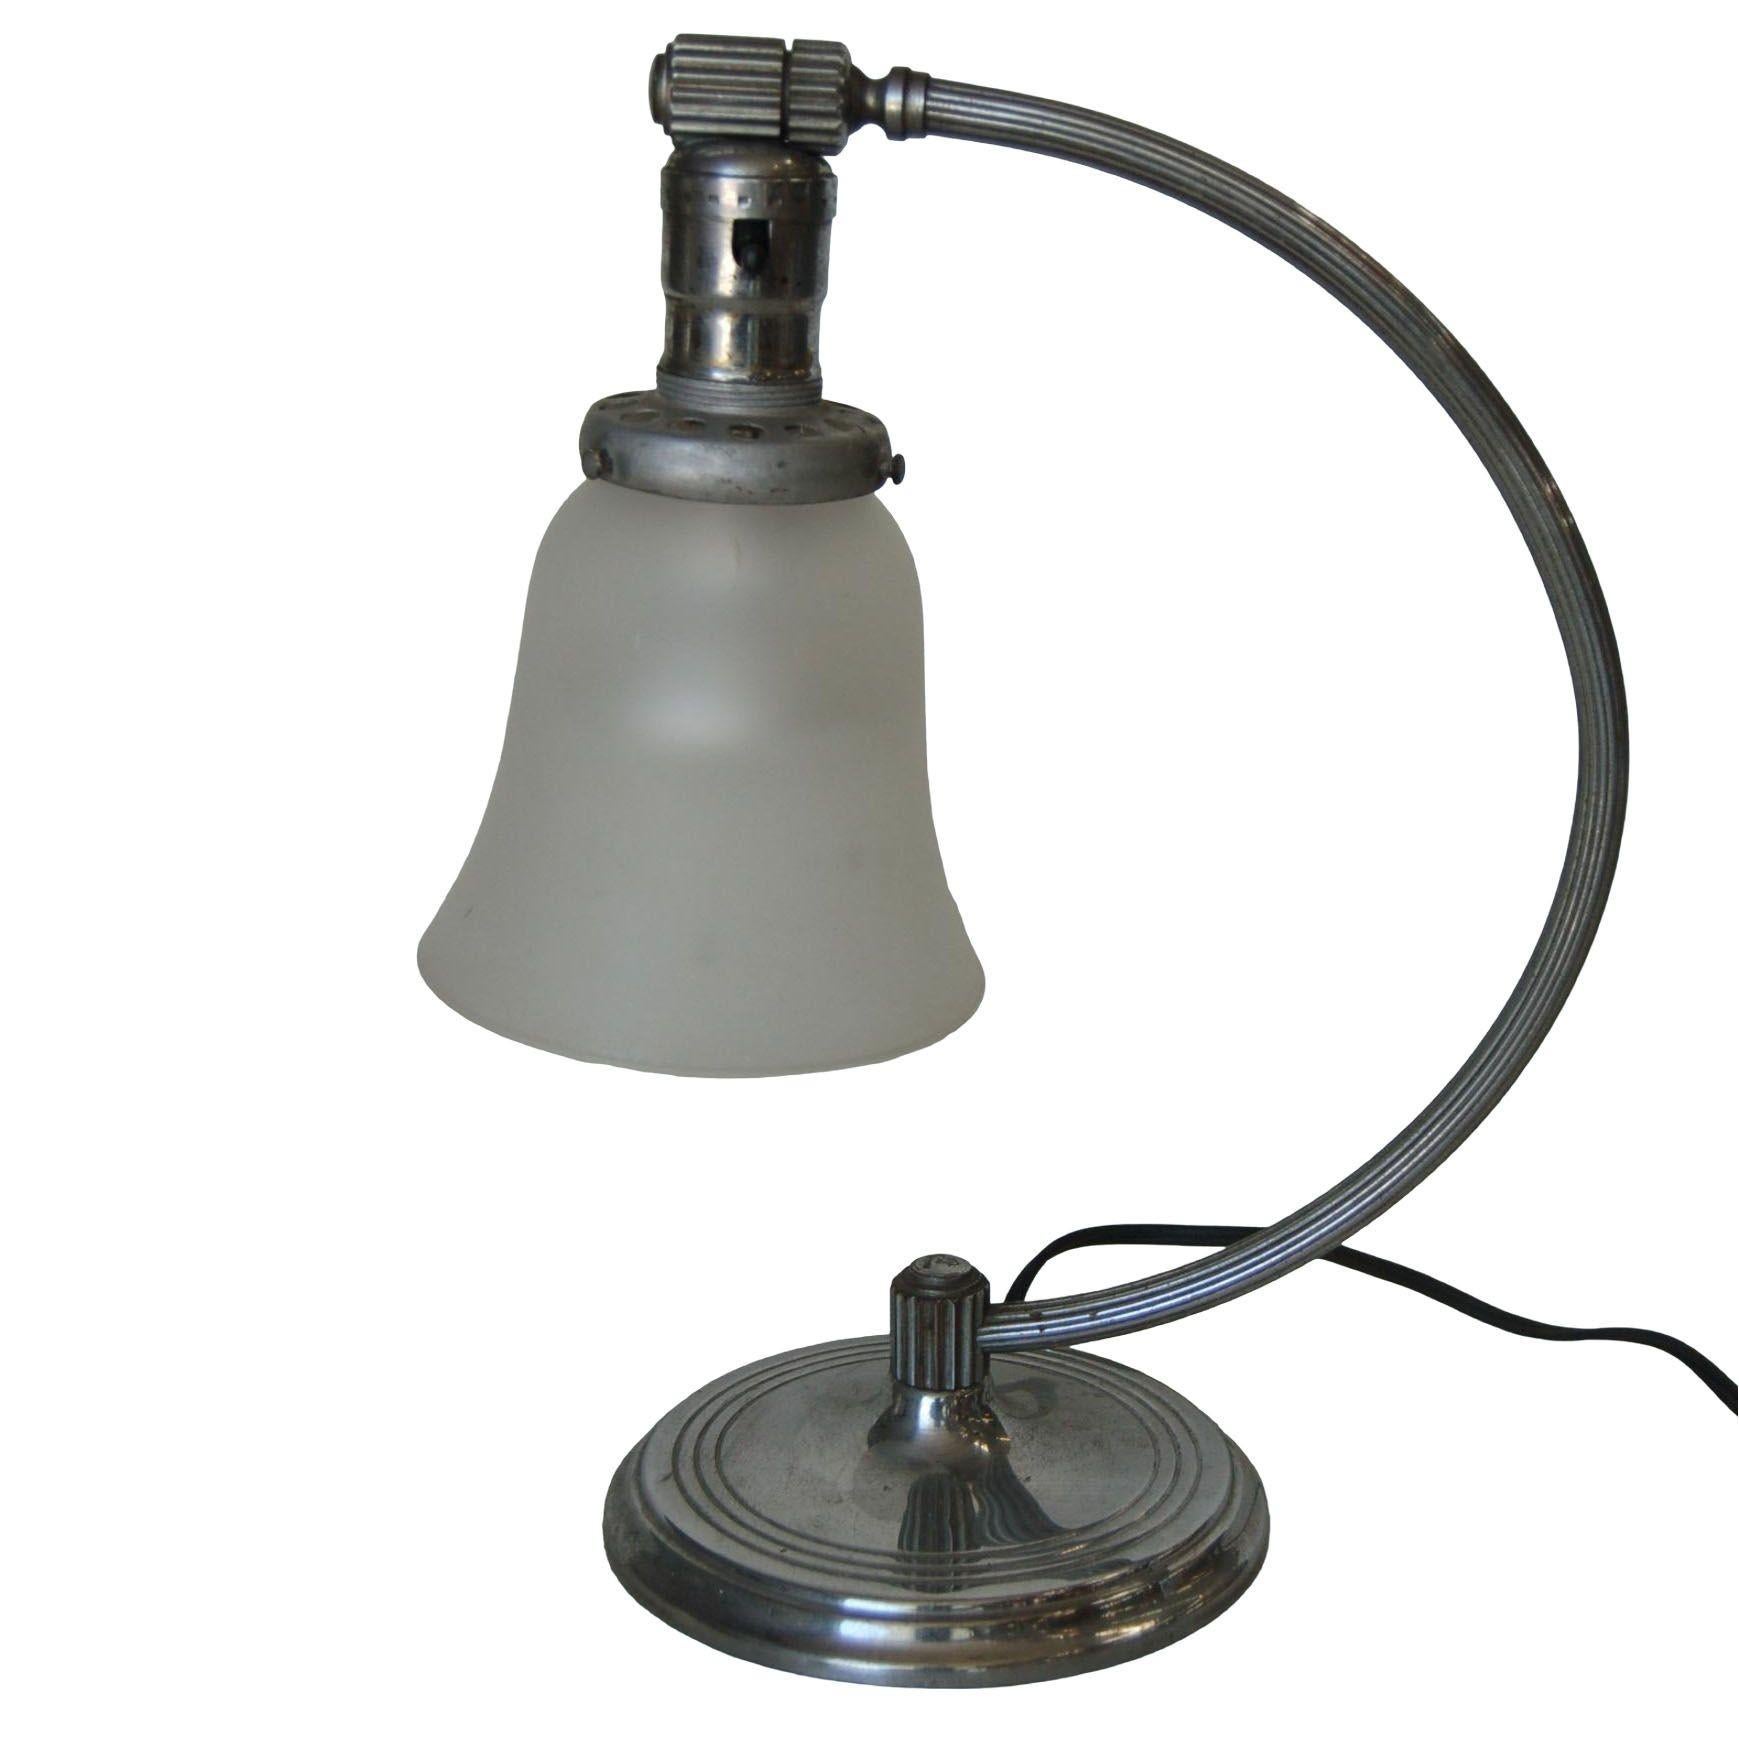 1930s polished nickel-plated accent reading table lamp with frosted glass. Measures 10